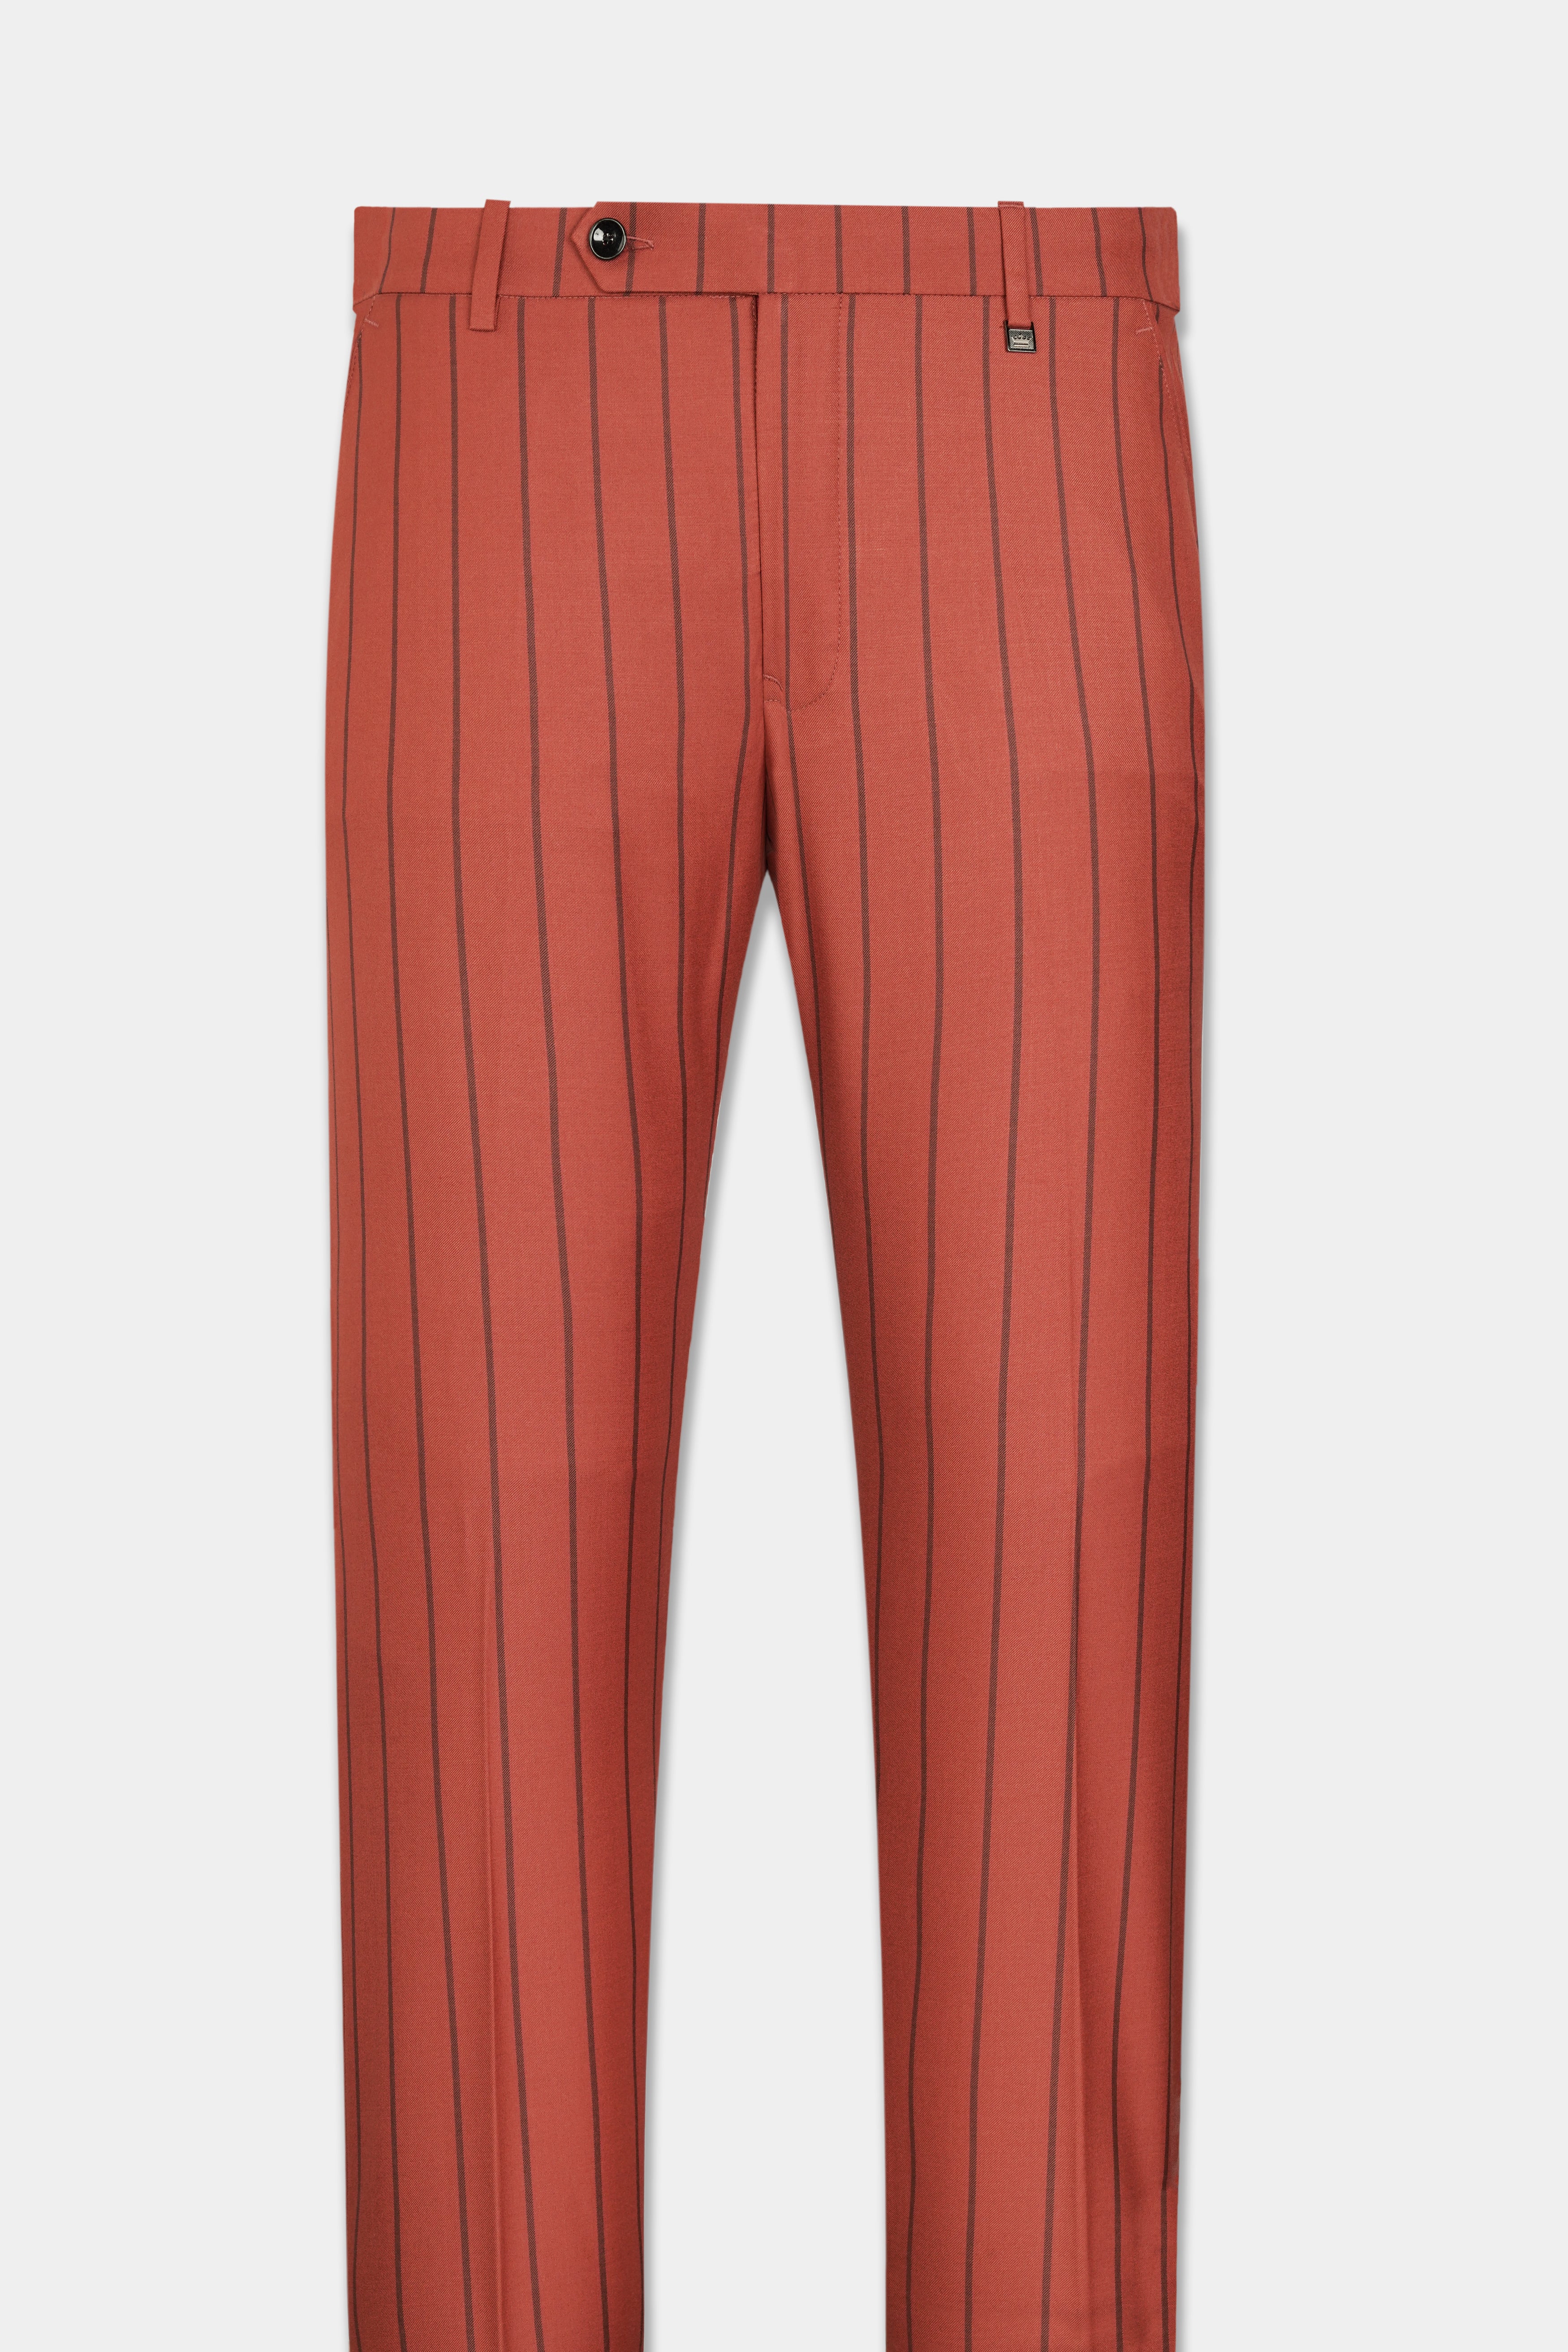 Mojo Red Striped Wool Rich Pant